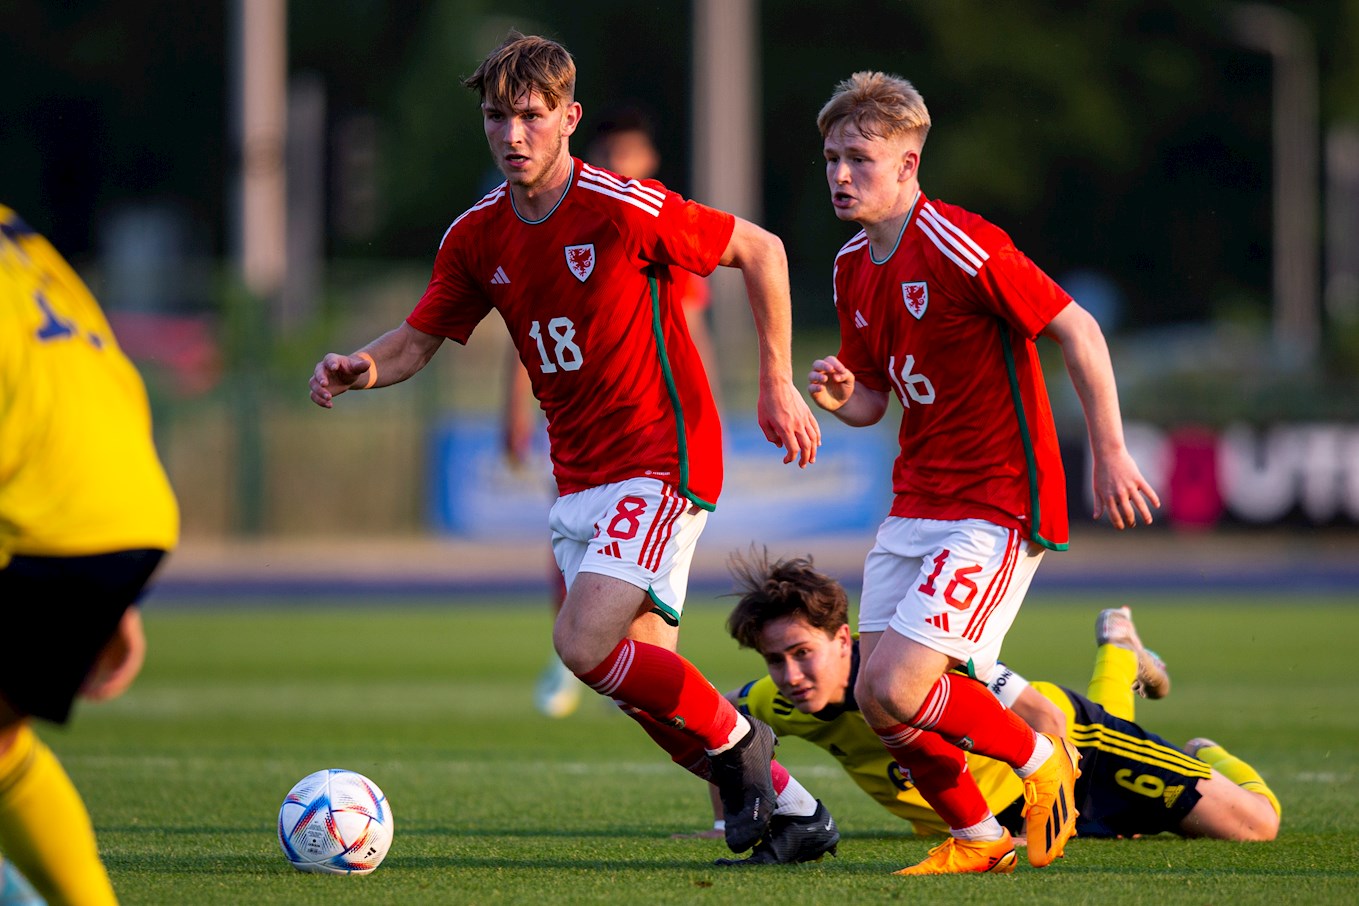 Jonathan Bland in action for Wales U19s